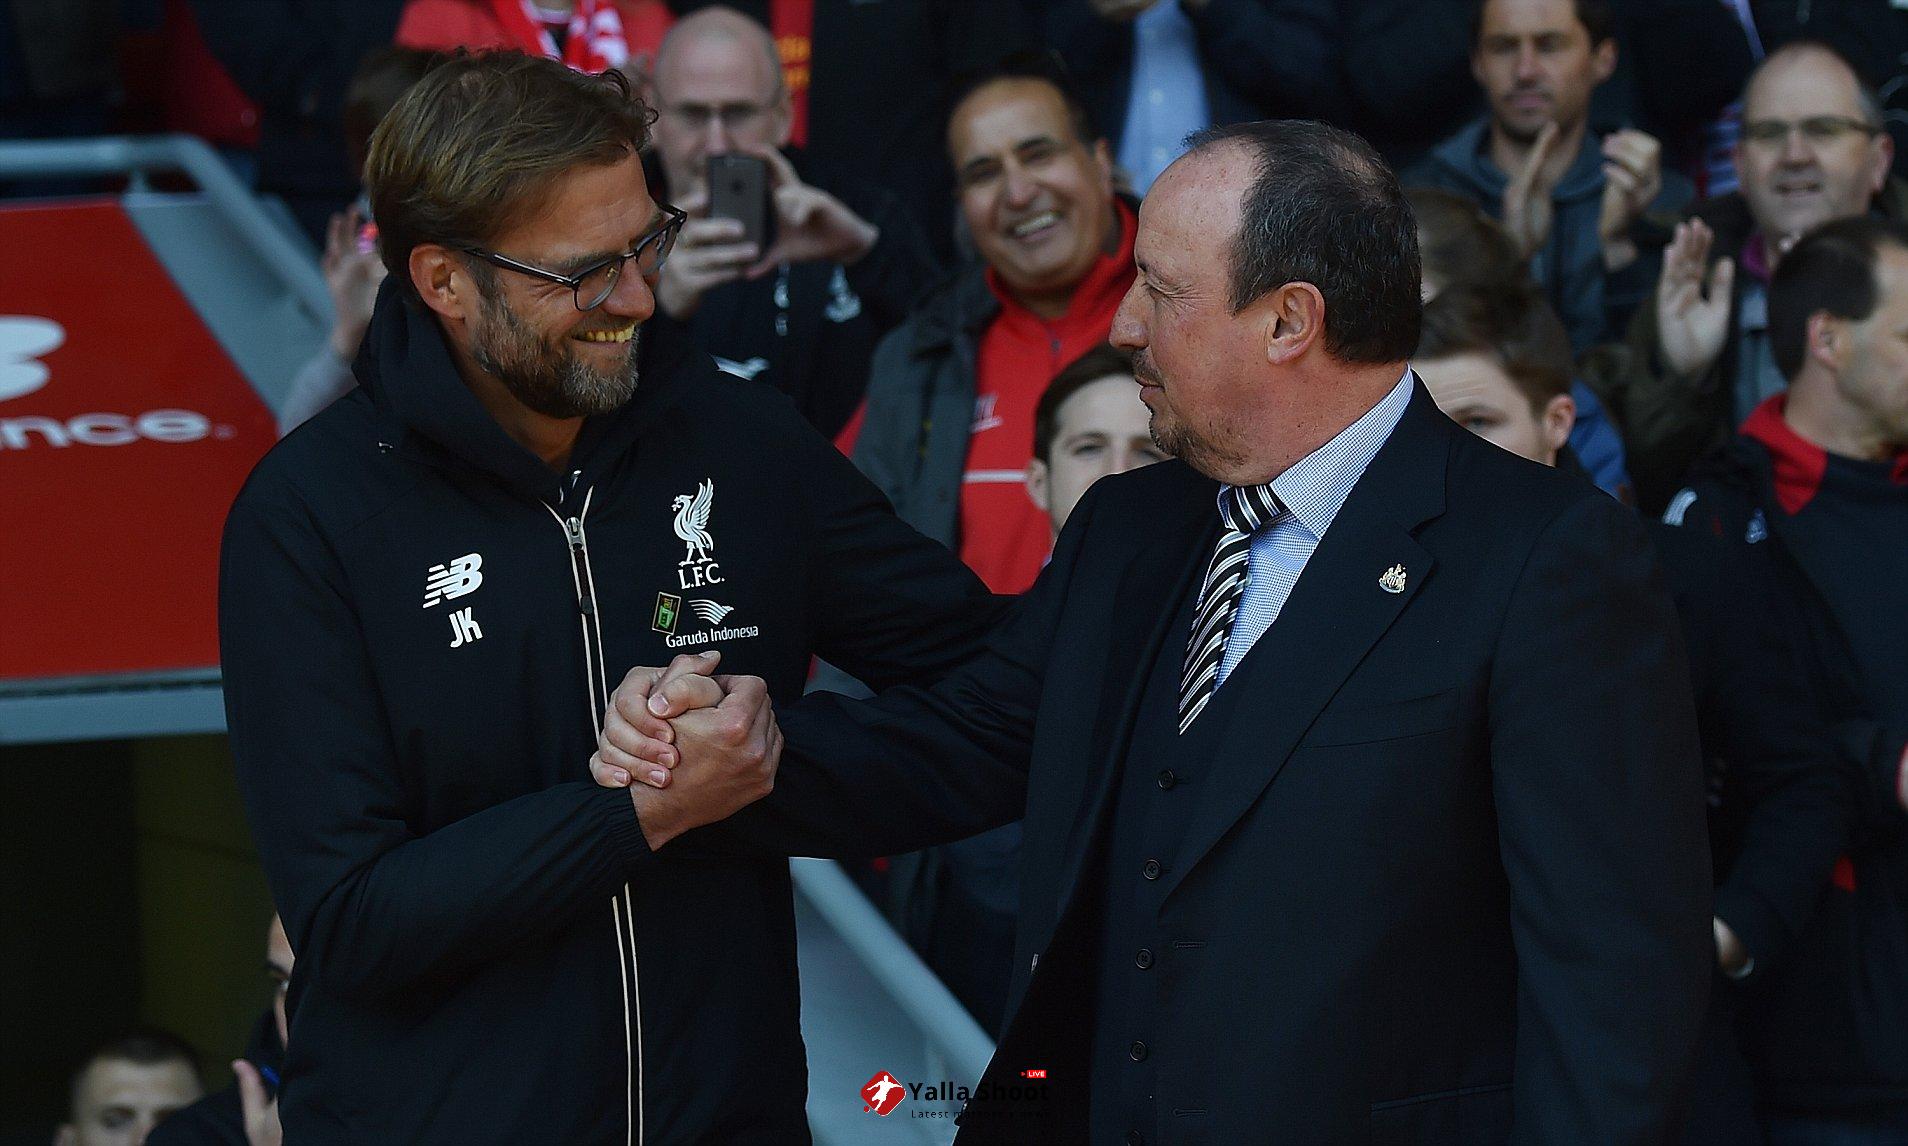 Ex-Liverpool coach Rafael Benitez on Jurgen Klopp departure - 'I know people there, I know how it went'